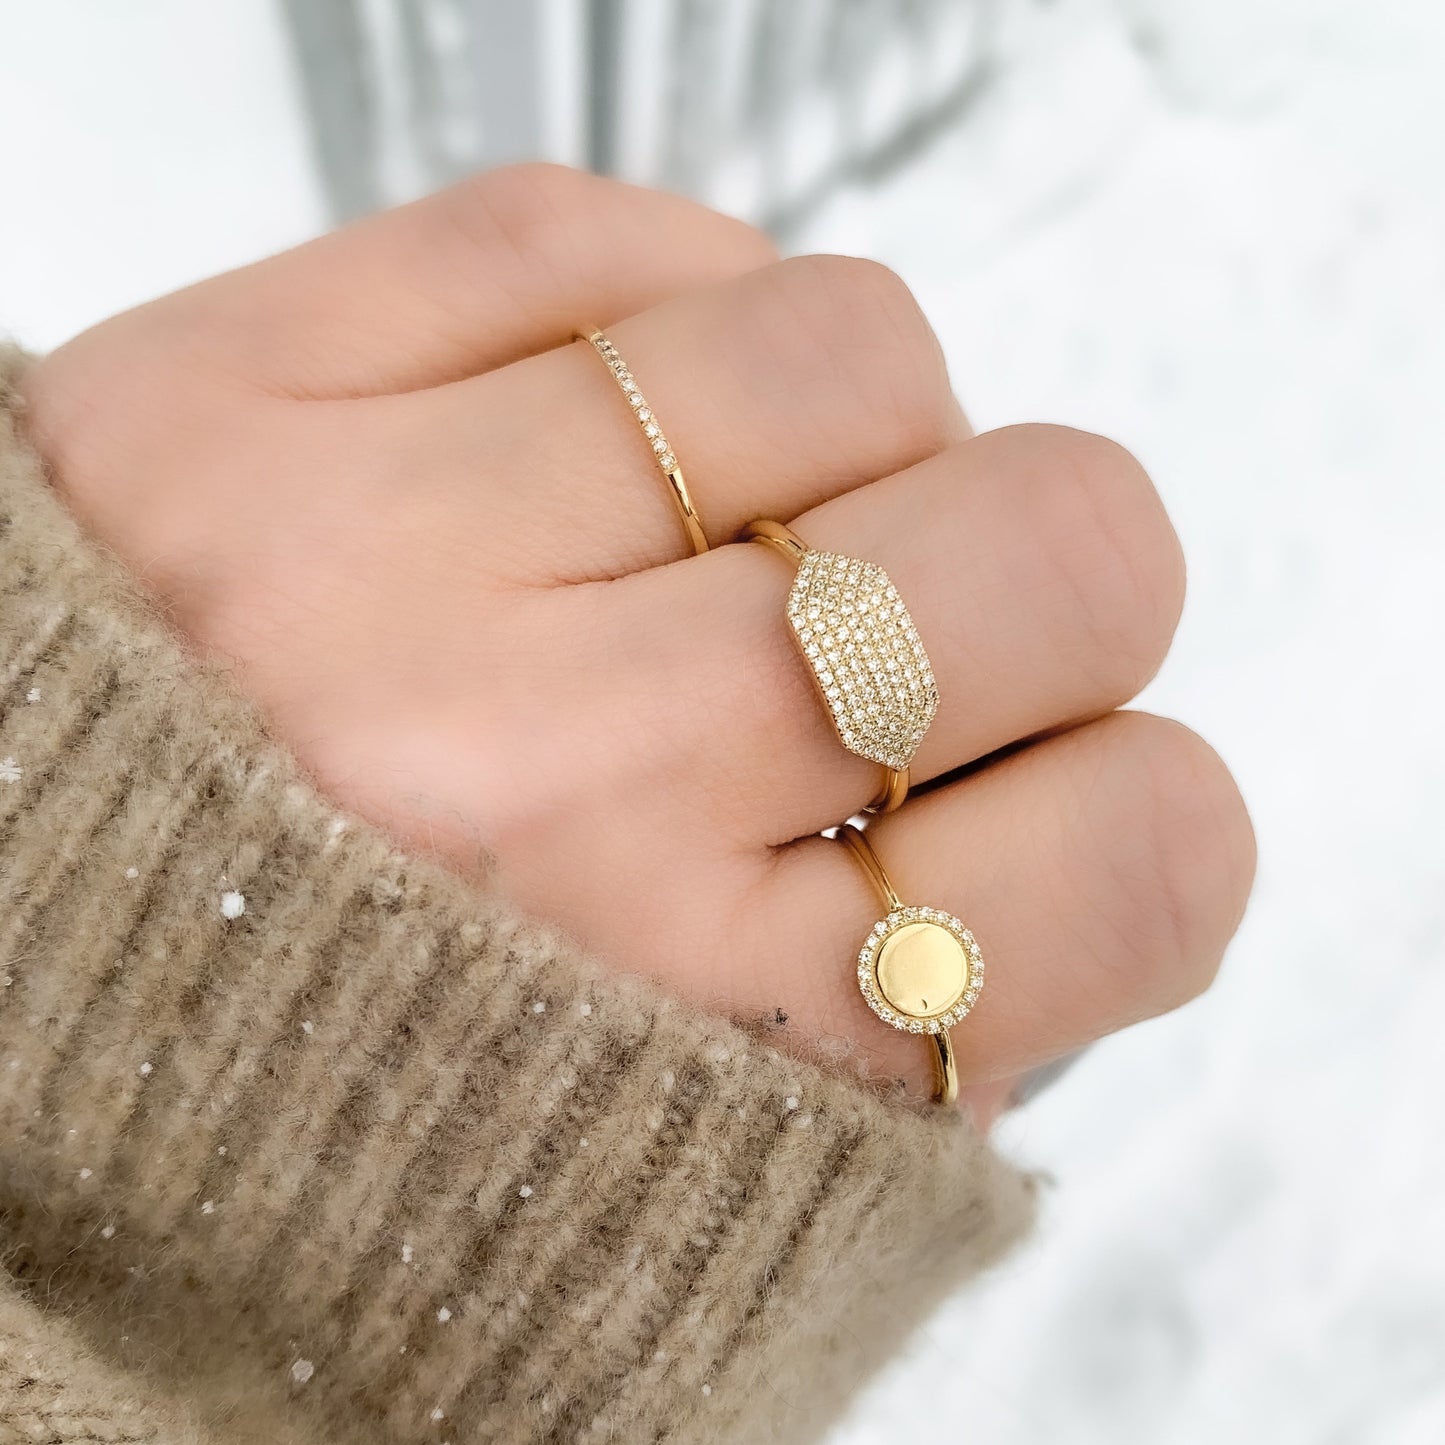 Wearing our thin pave' diamond 14kt gold ring